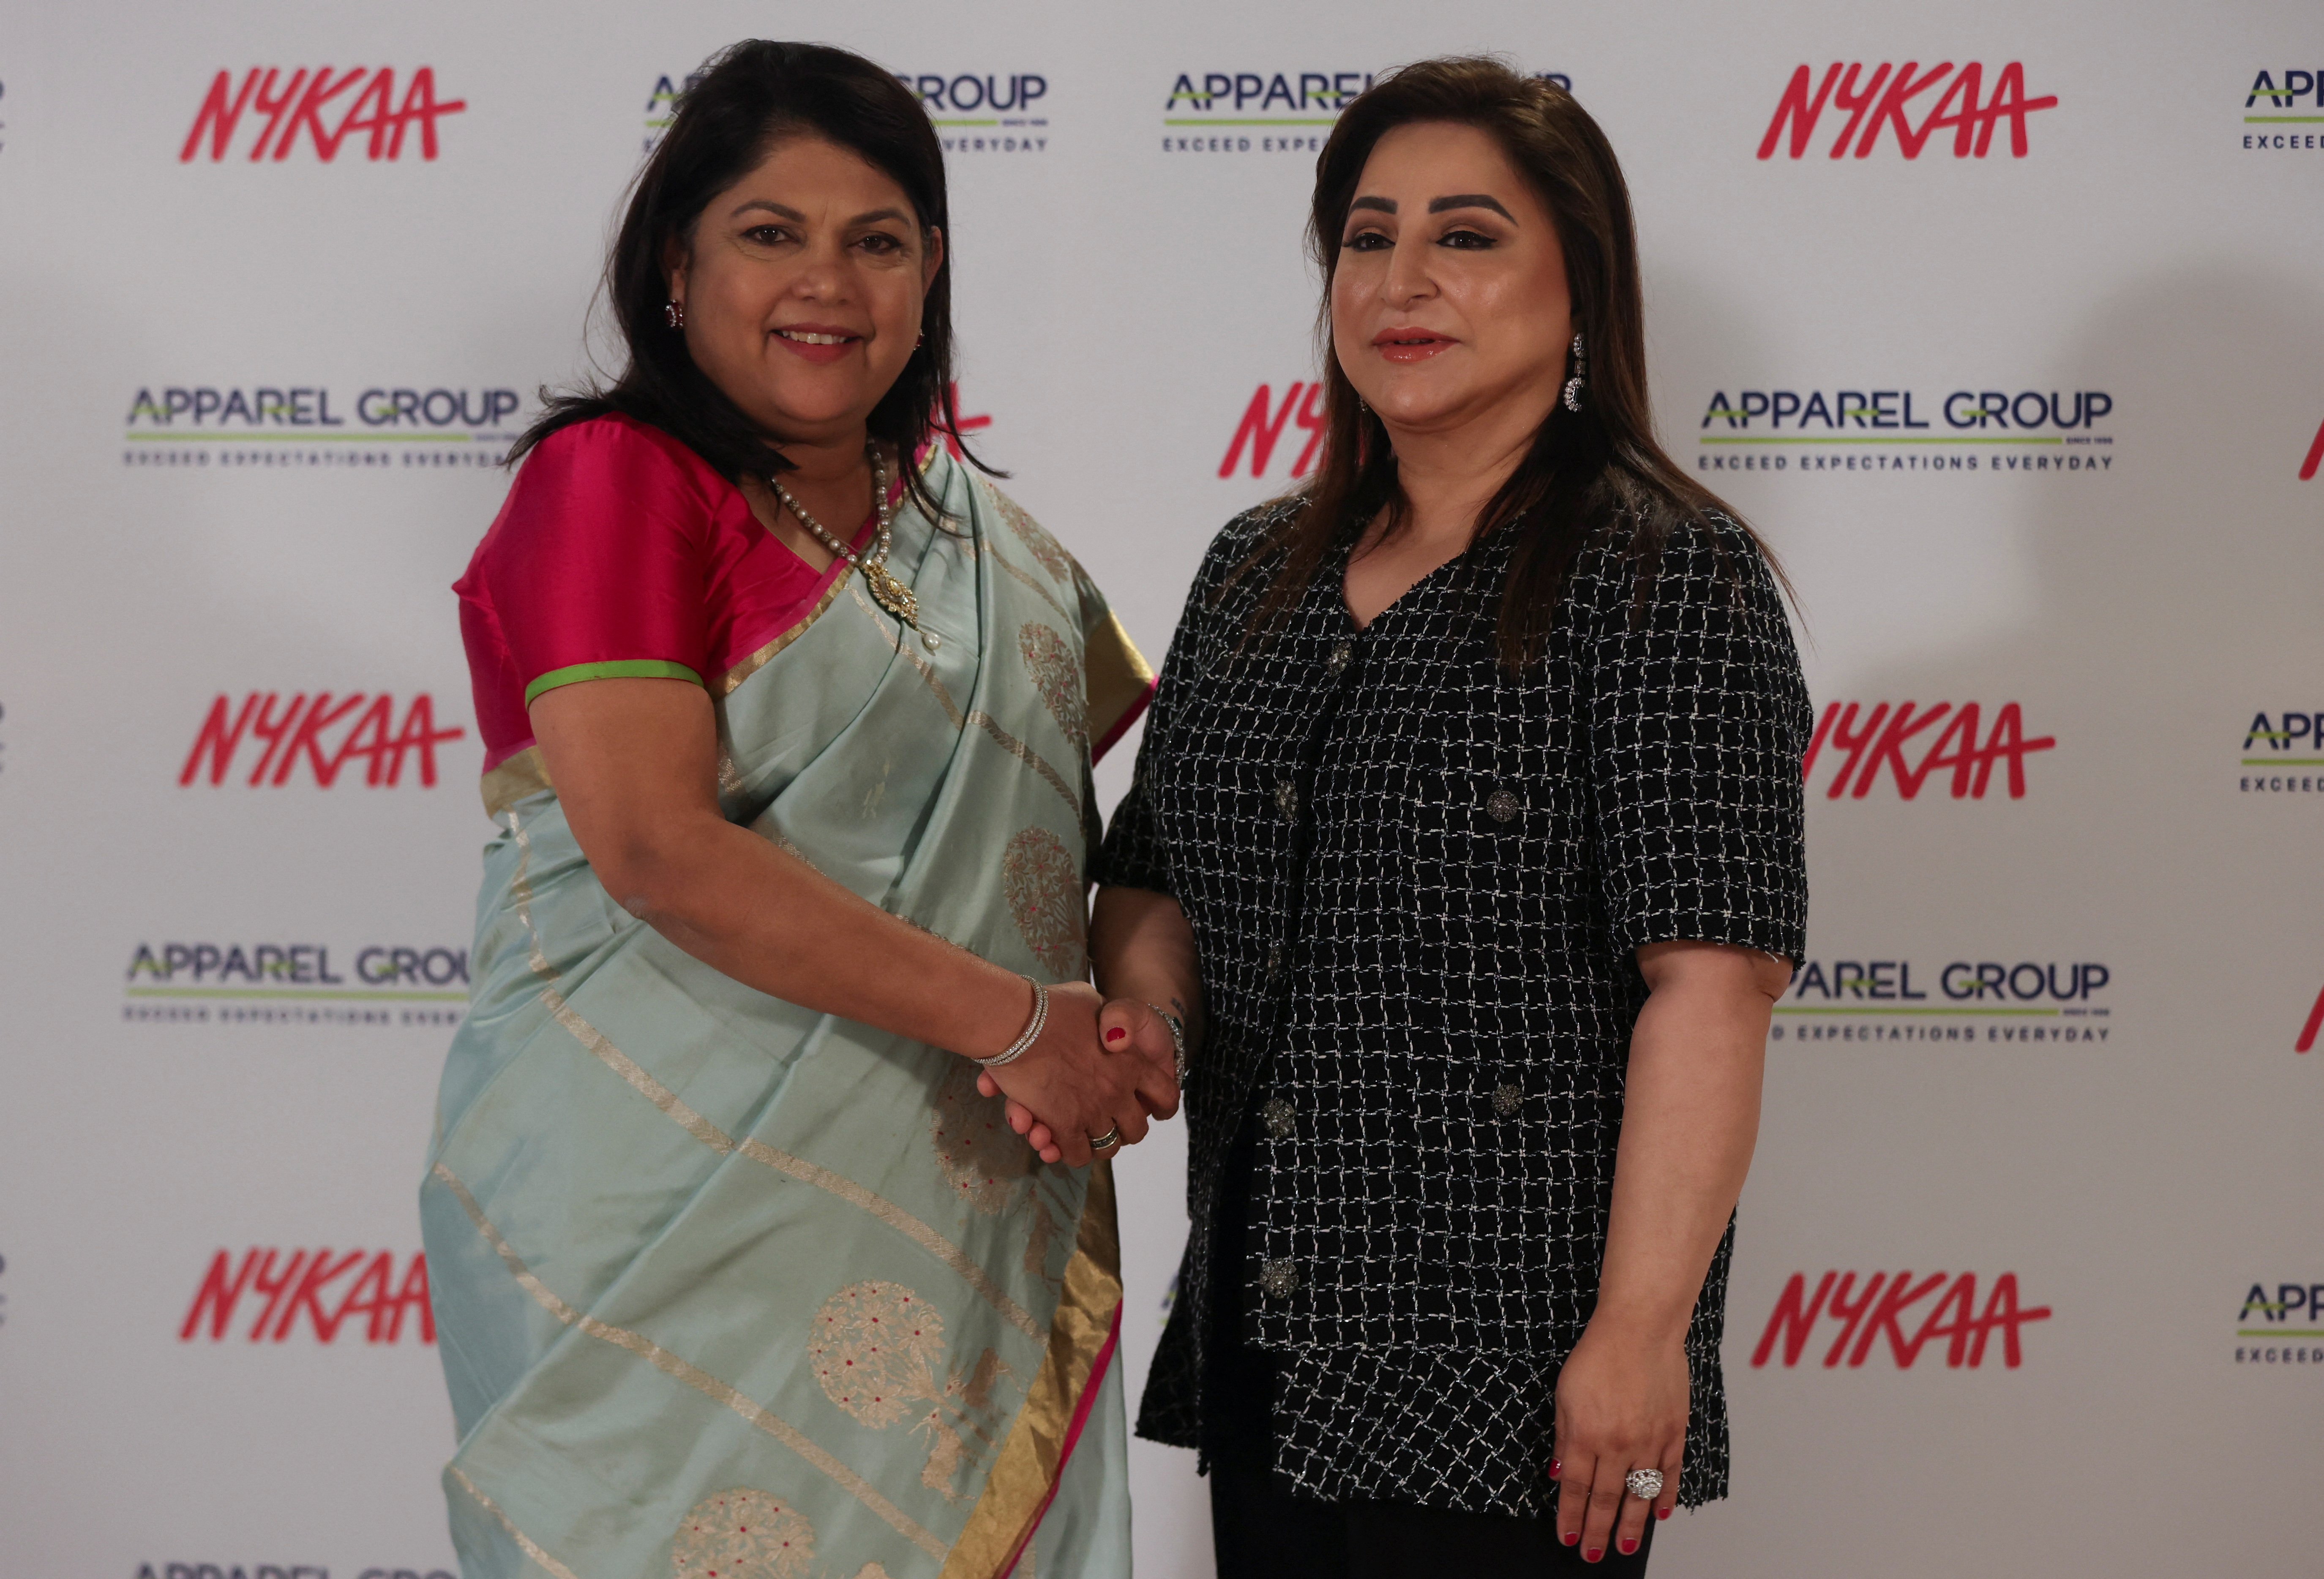 Falguni Nayar, founder and CEO of the beauty and lifestyle retail company Nykaa and Sima Ganwani Ved, Founder and Chairwoman of fashion and lifestyle retail conglomerate, Apparel Group pose for a picture during a strategic alliance announcement in Mumbai